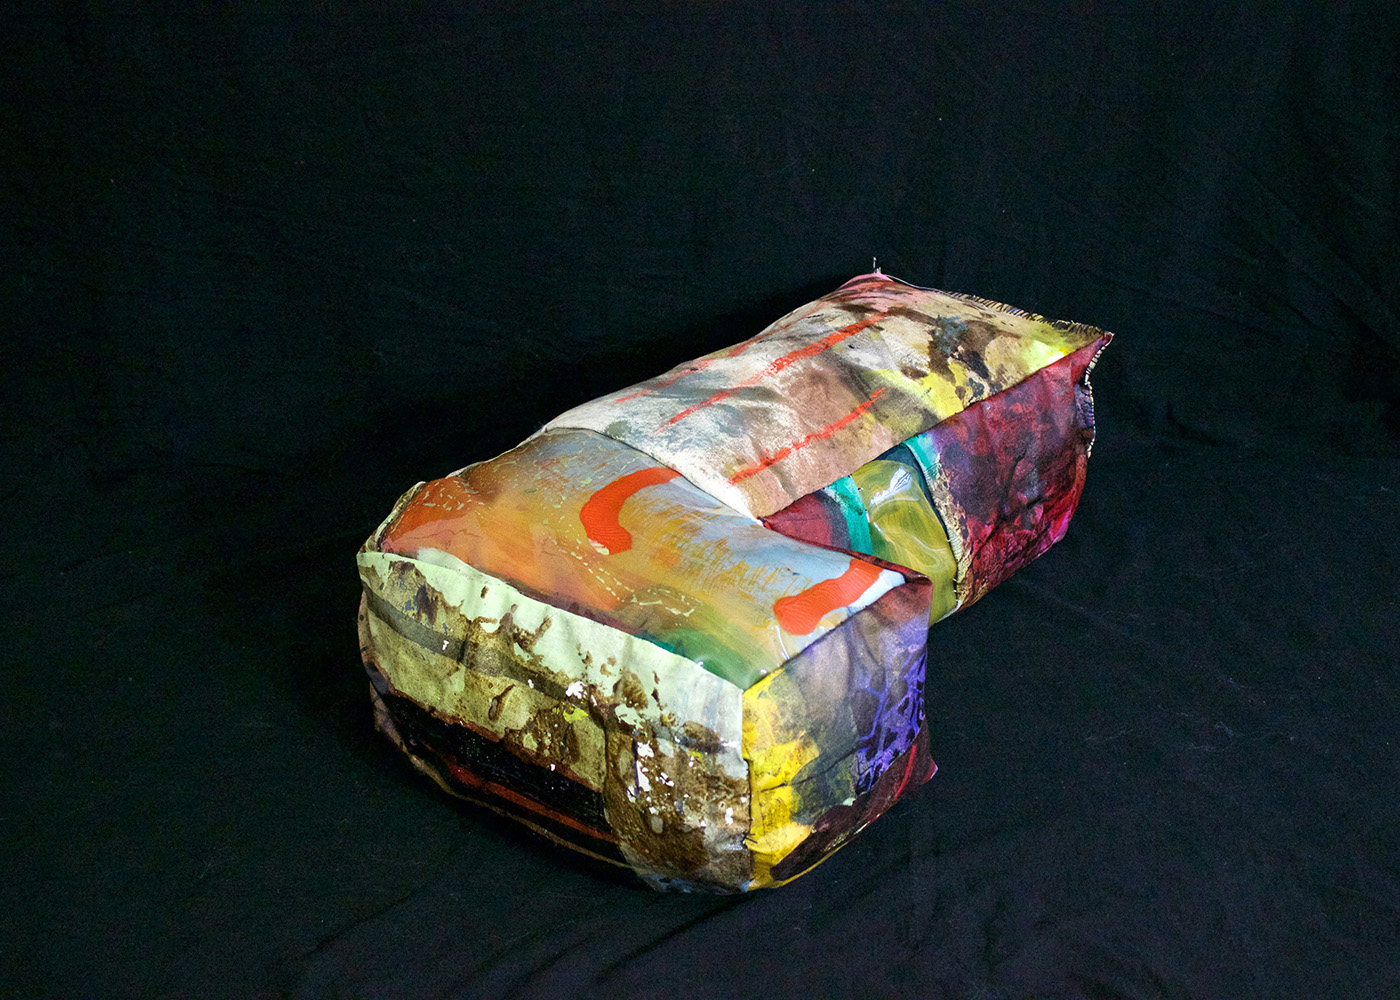 Quilts sewing acryic paint canvas mixed media pillows fibers hand sewing Patterning soft sculpture